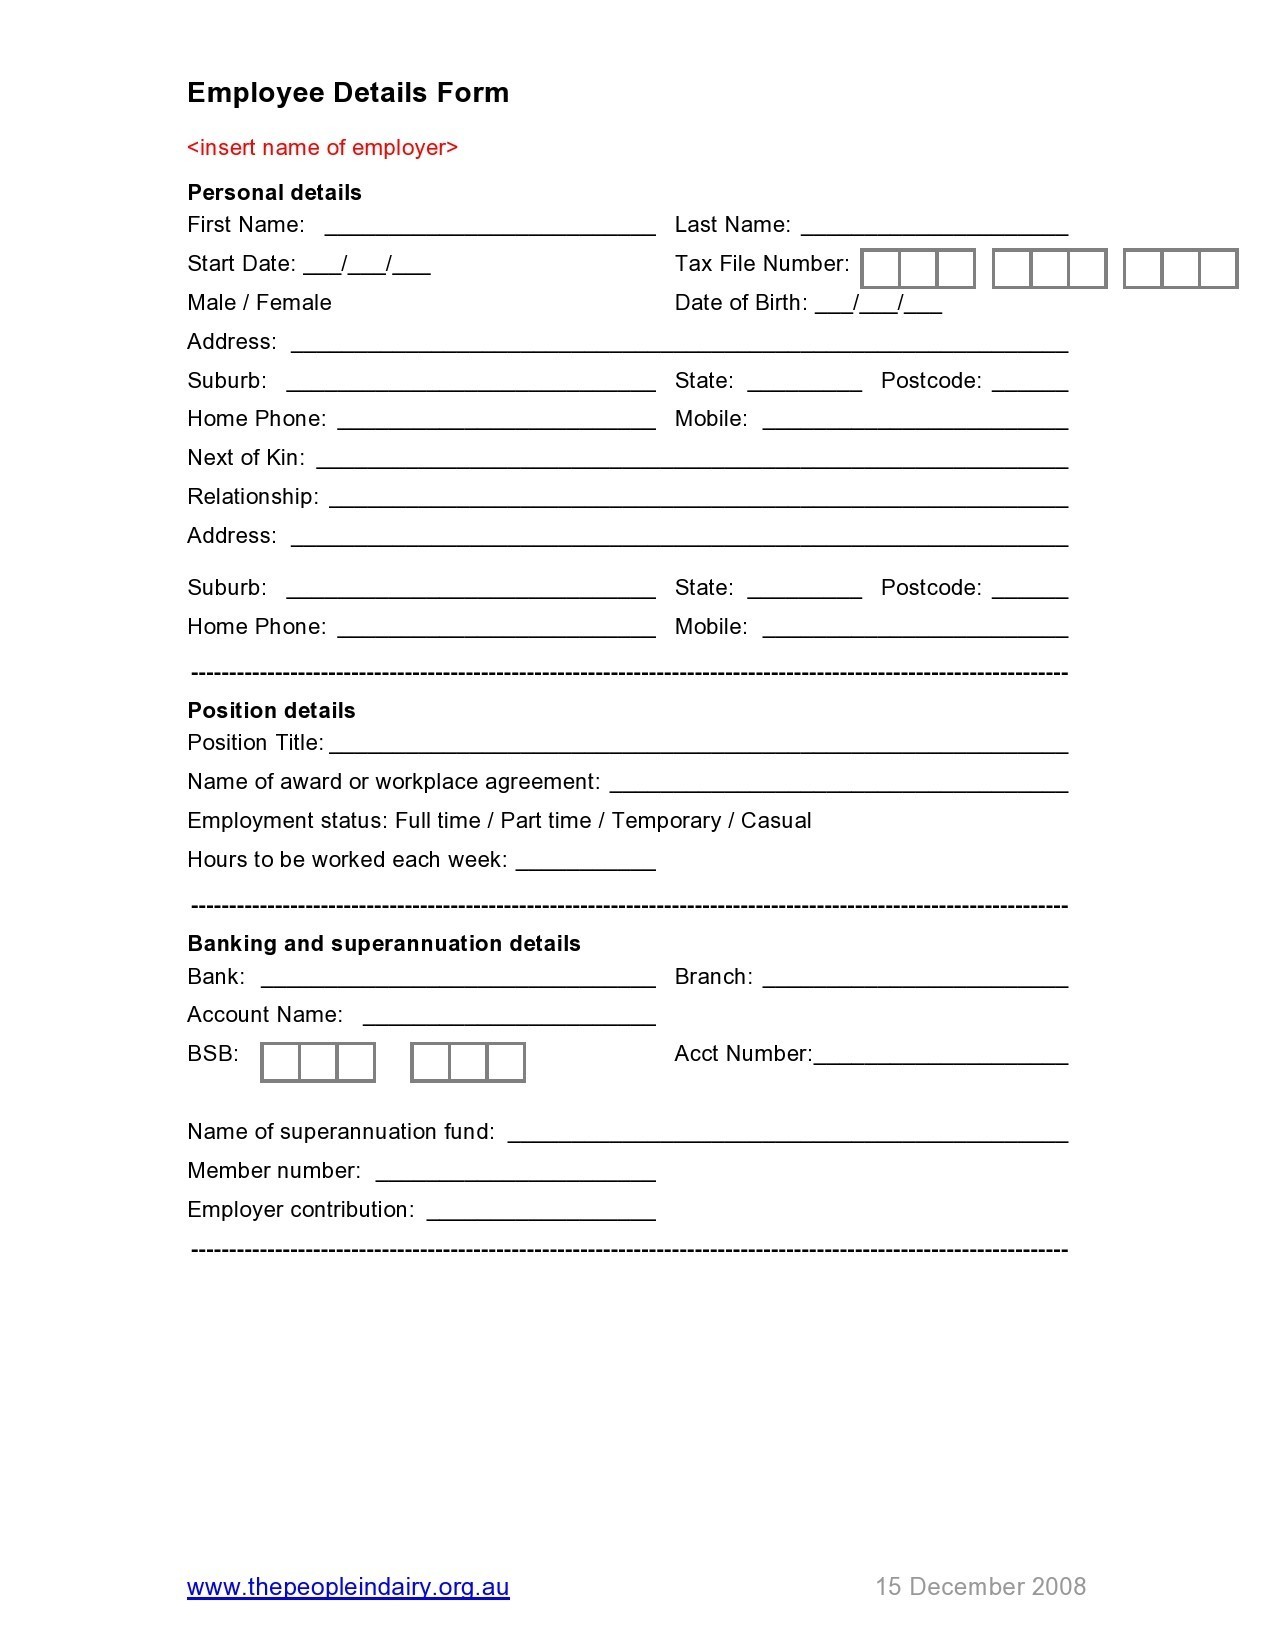 Free personal information form 28